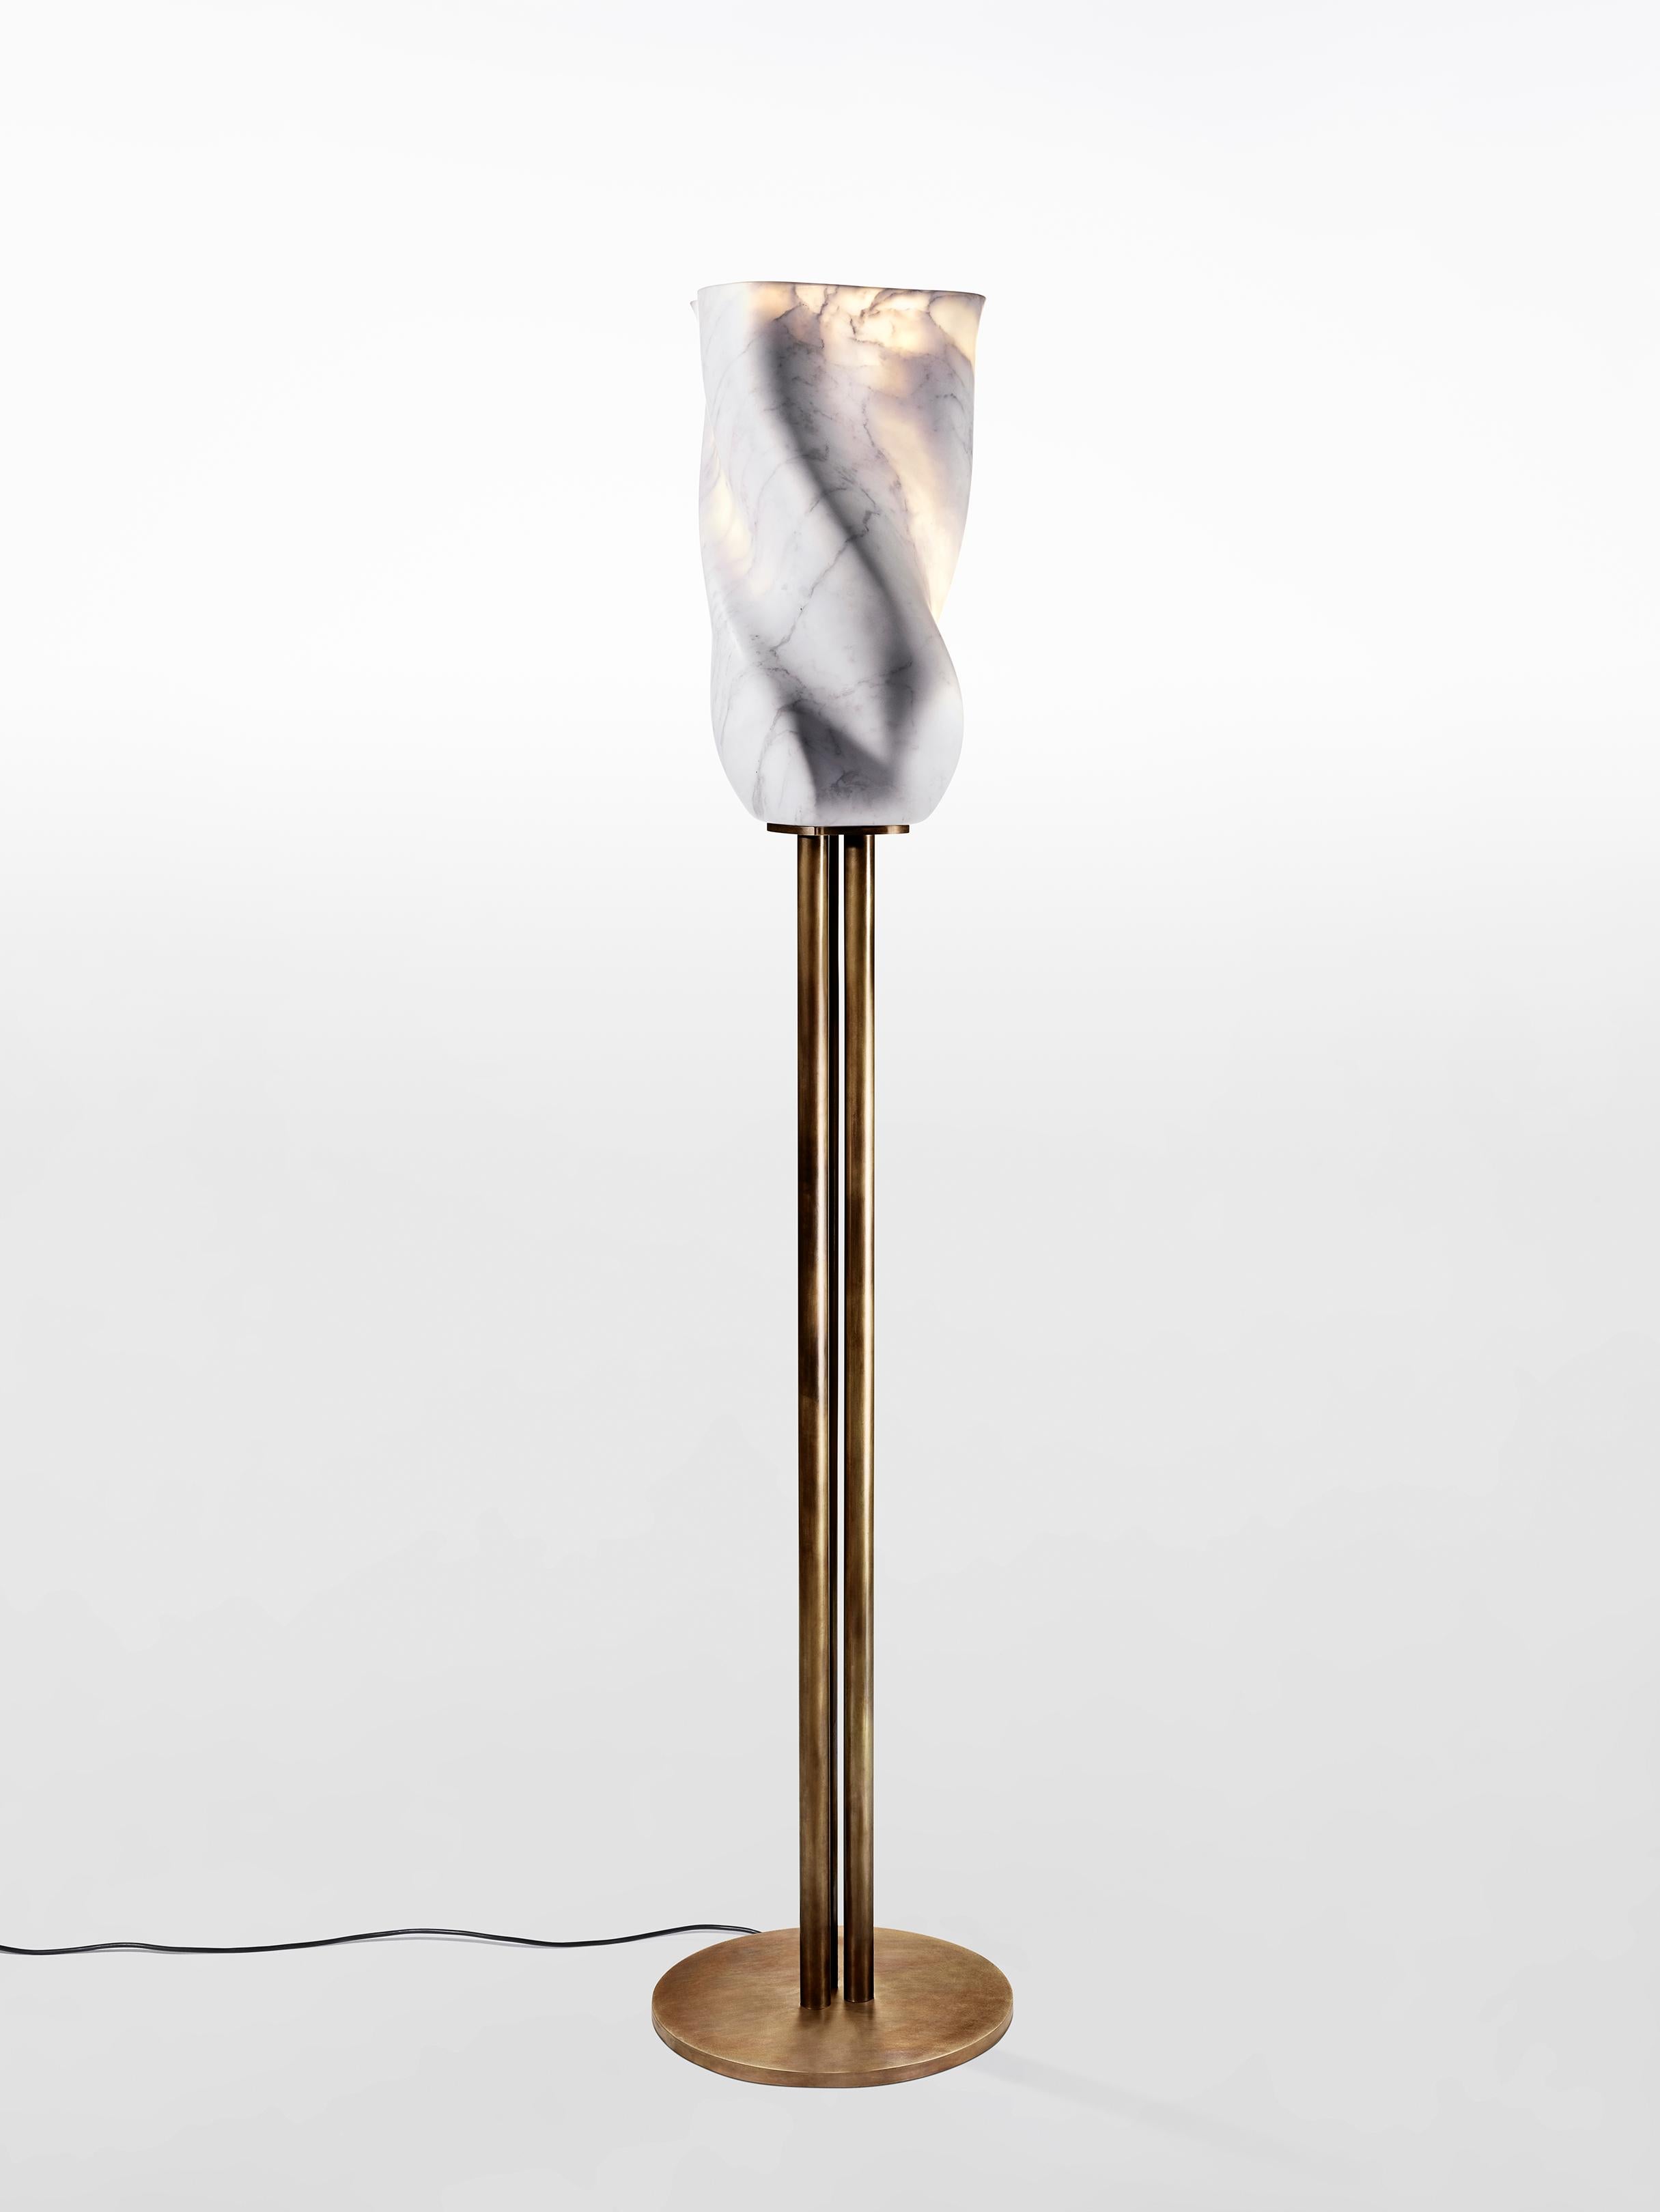 Floor lamp by Jonathan Hansen
12 Editions
Dimensions: 36 x 36 x 165 cm
Materials: Calacatta marble, architectural bronze


SERIES I CAPTUM BIOMORFE is a group of nine sculpture works created by New York artist Jonathan Hansen. Captum is a